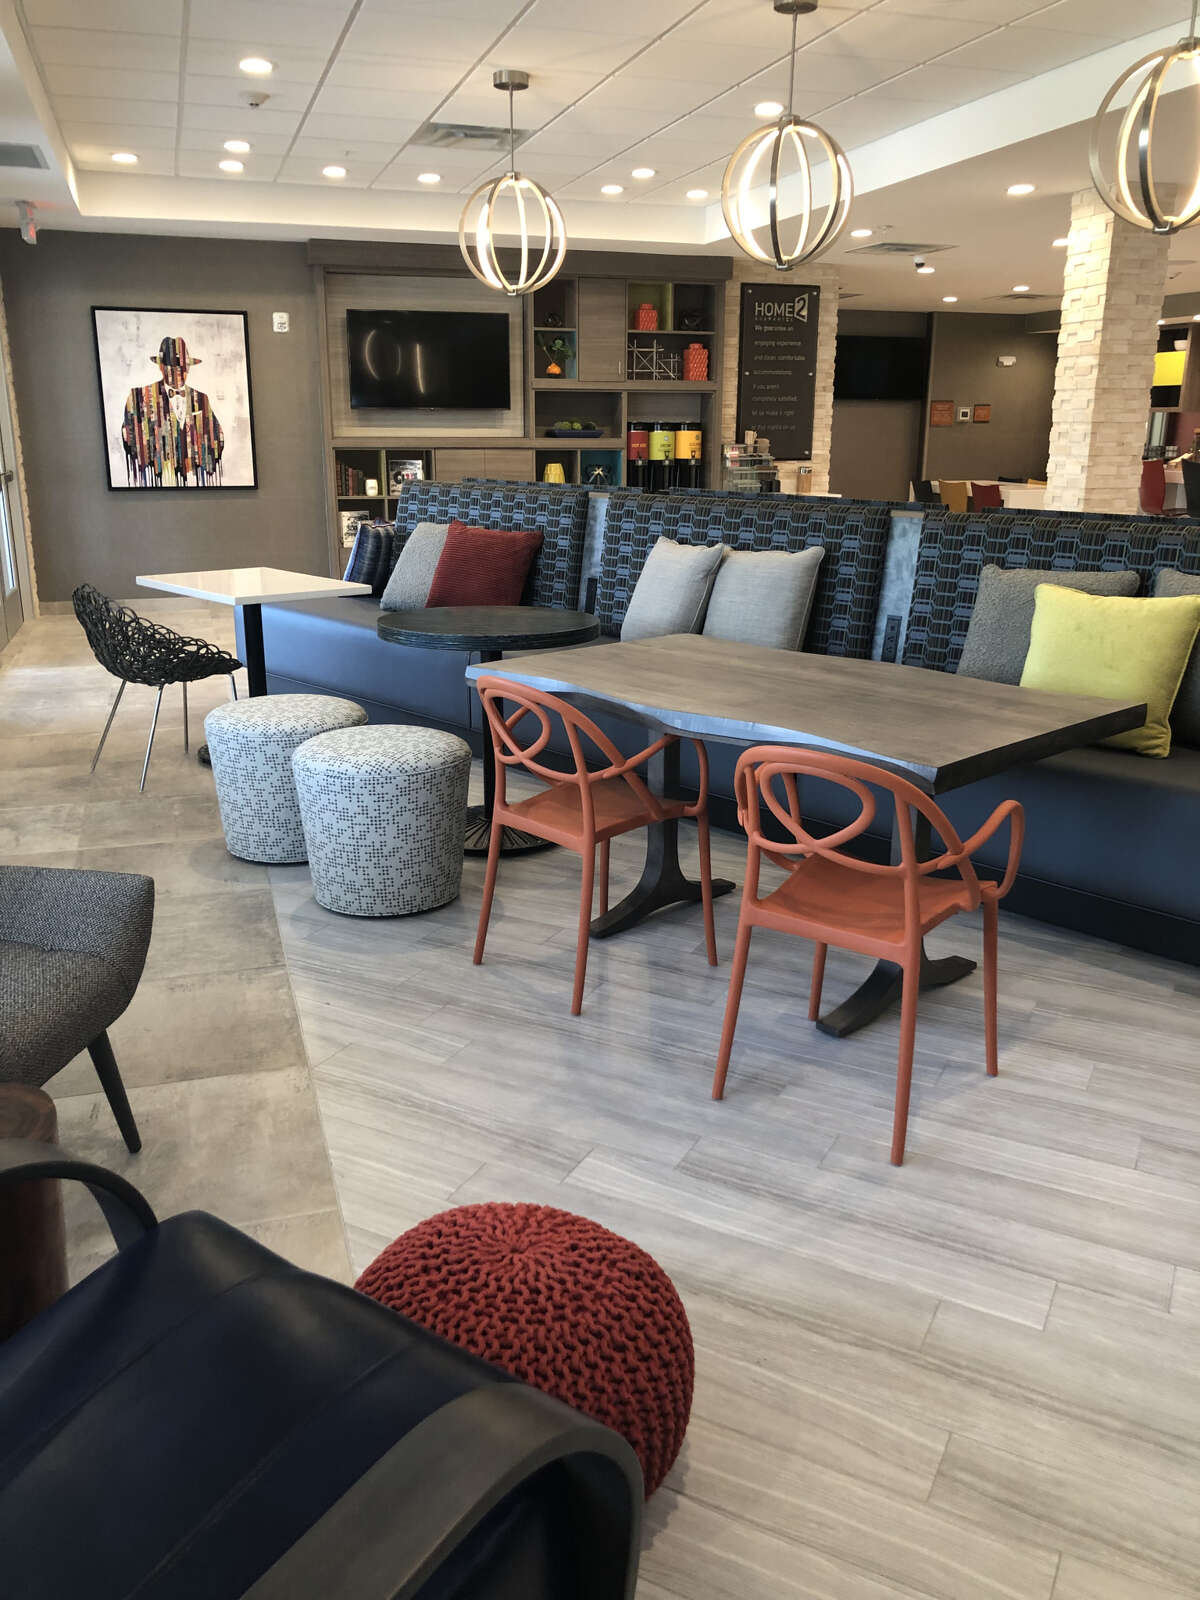 The lobby of the Home2 Suites by Hilton Houston Westchase at 3125 Wilcrest Drive.